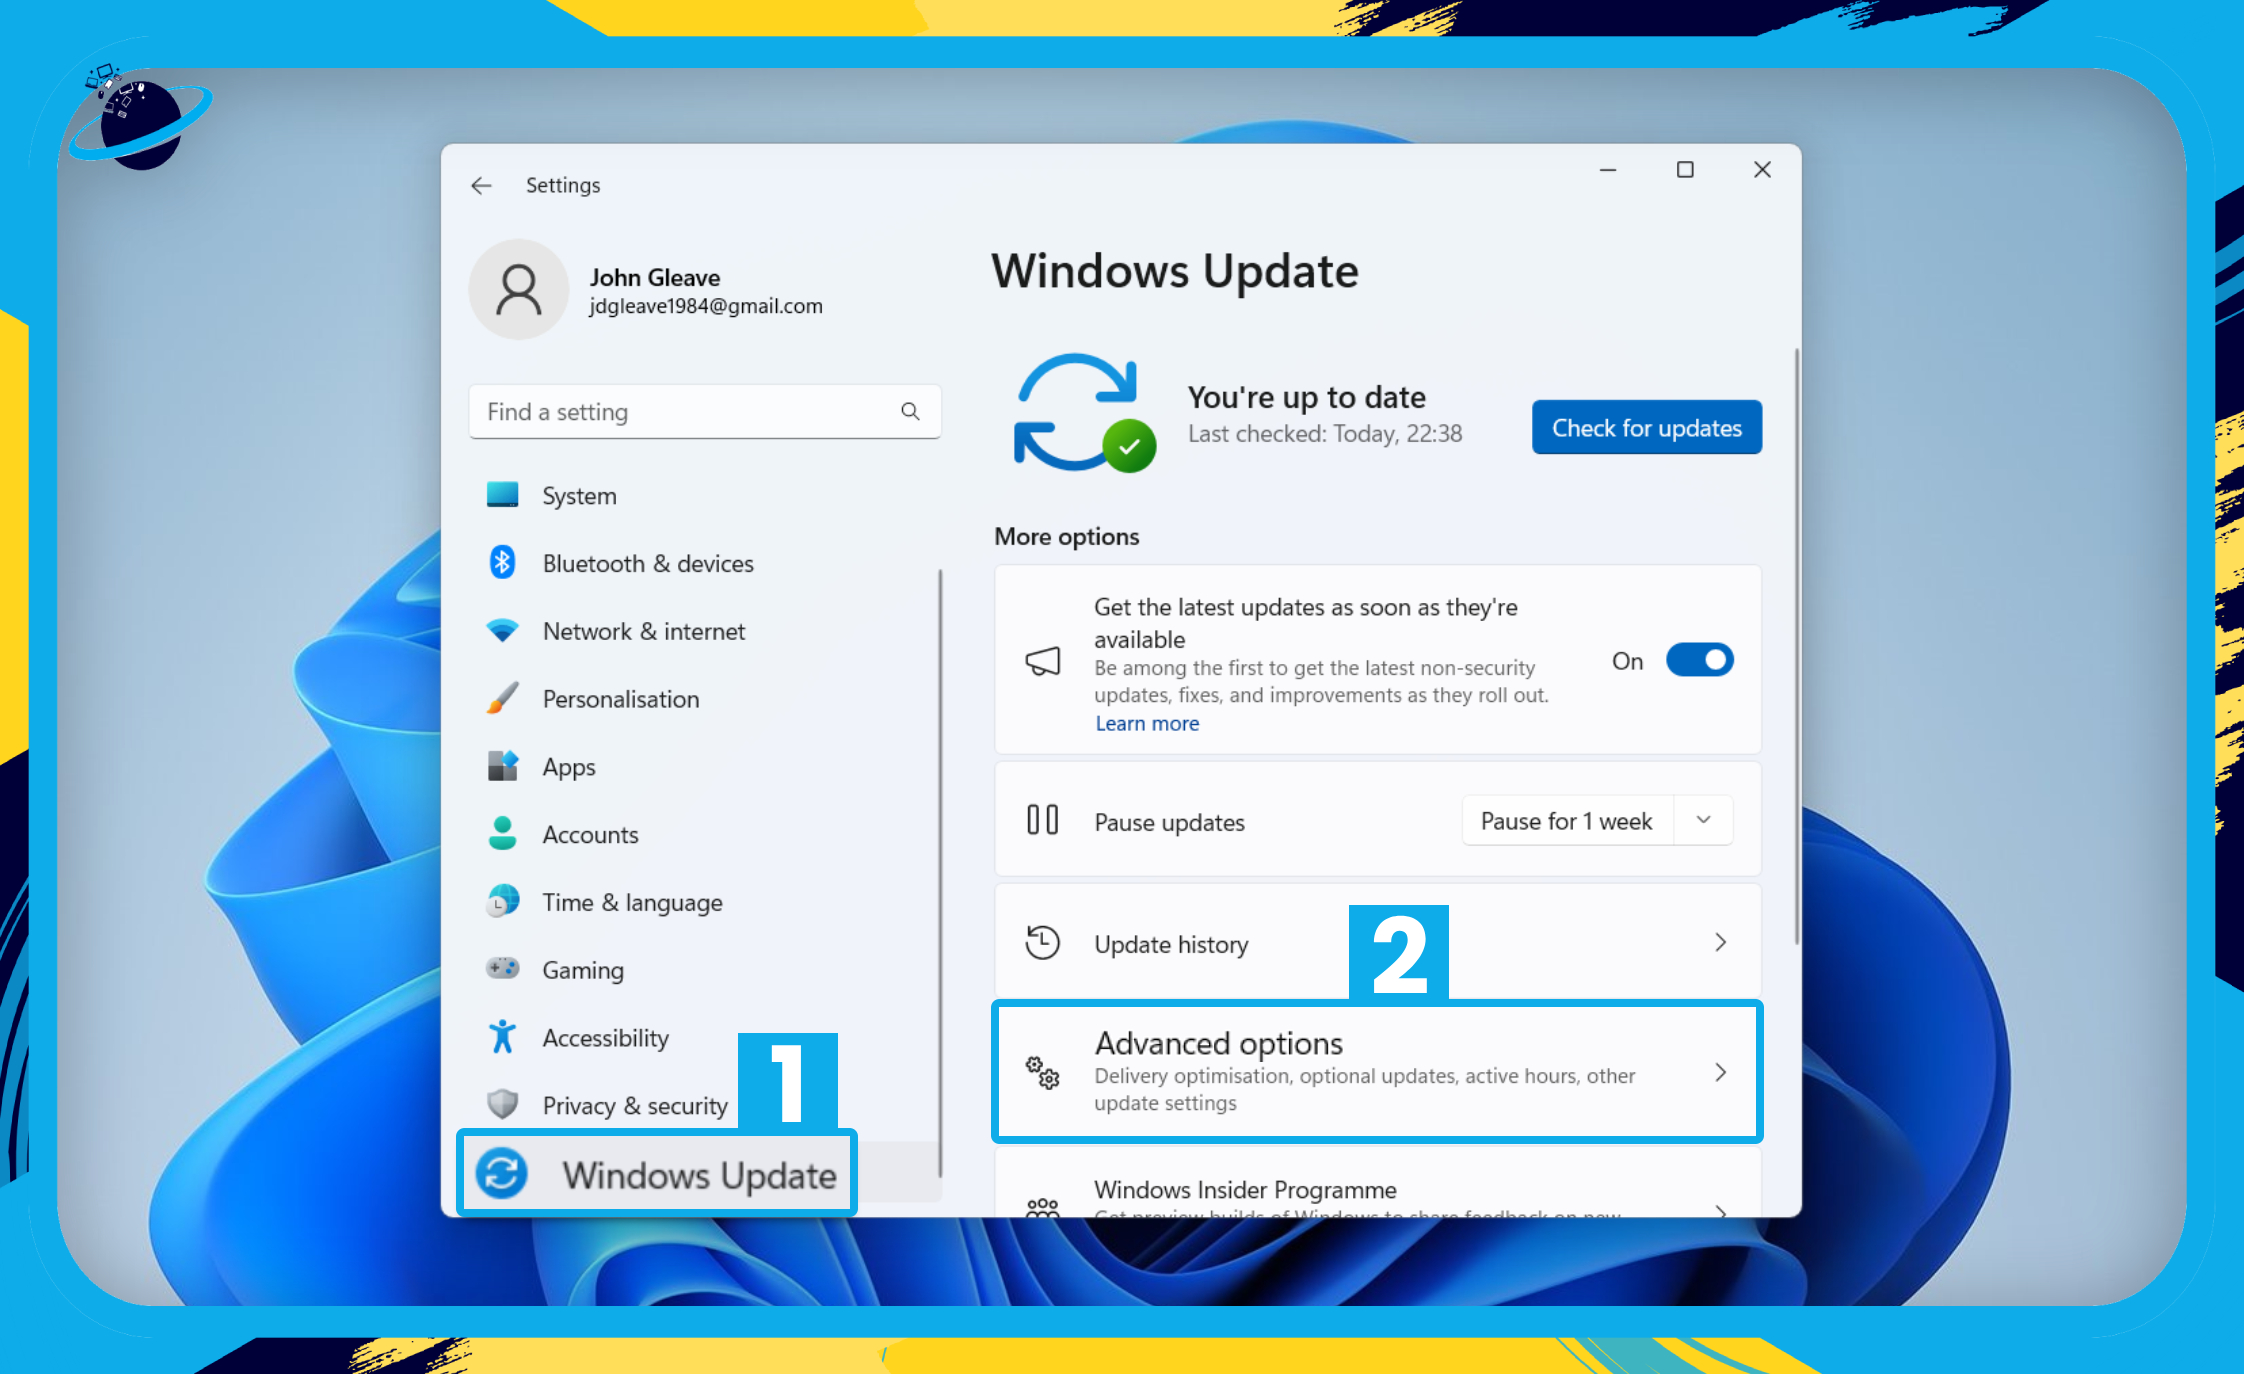 Go to Windows Update, then advanced options.